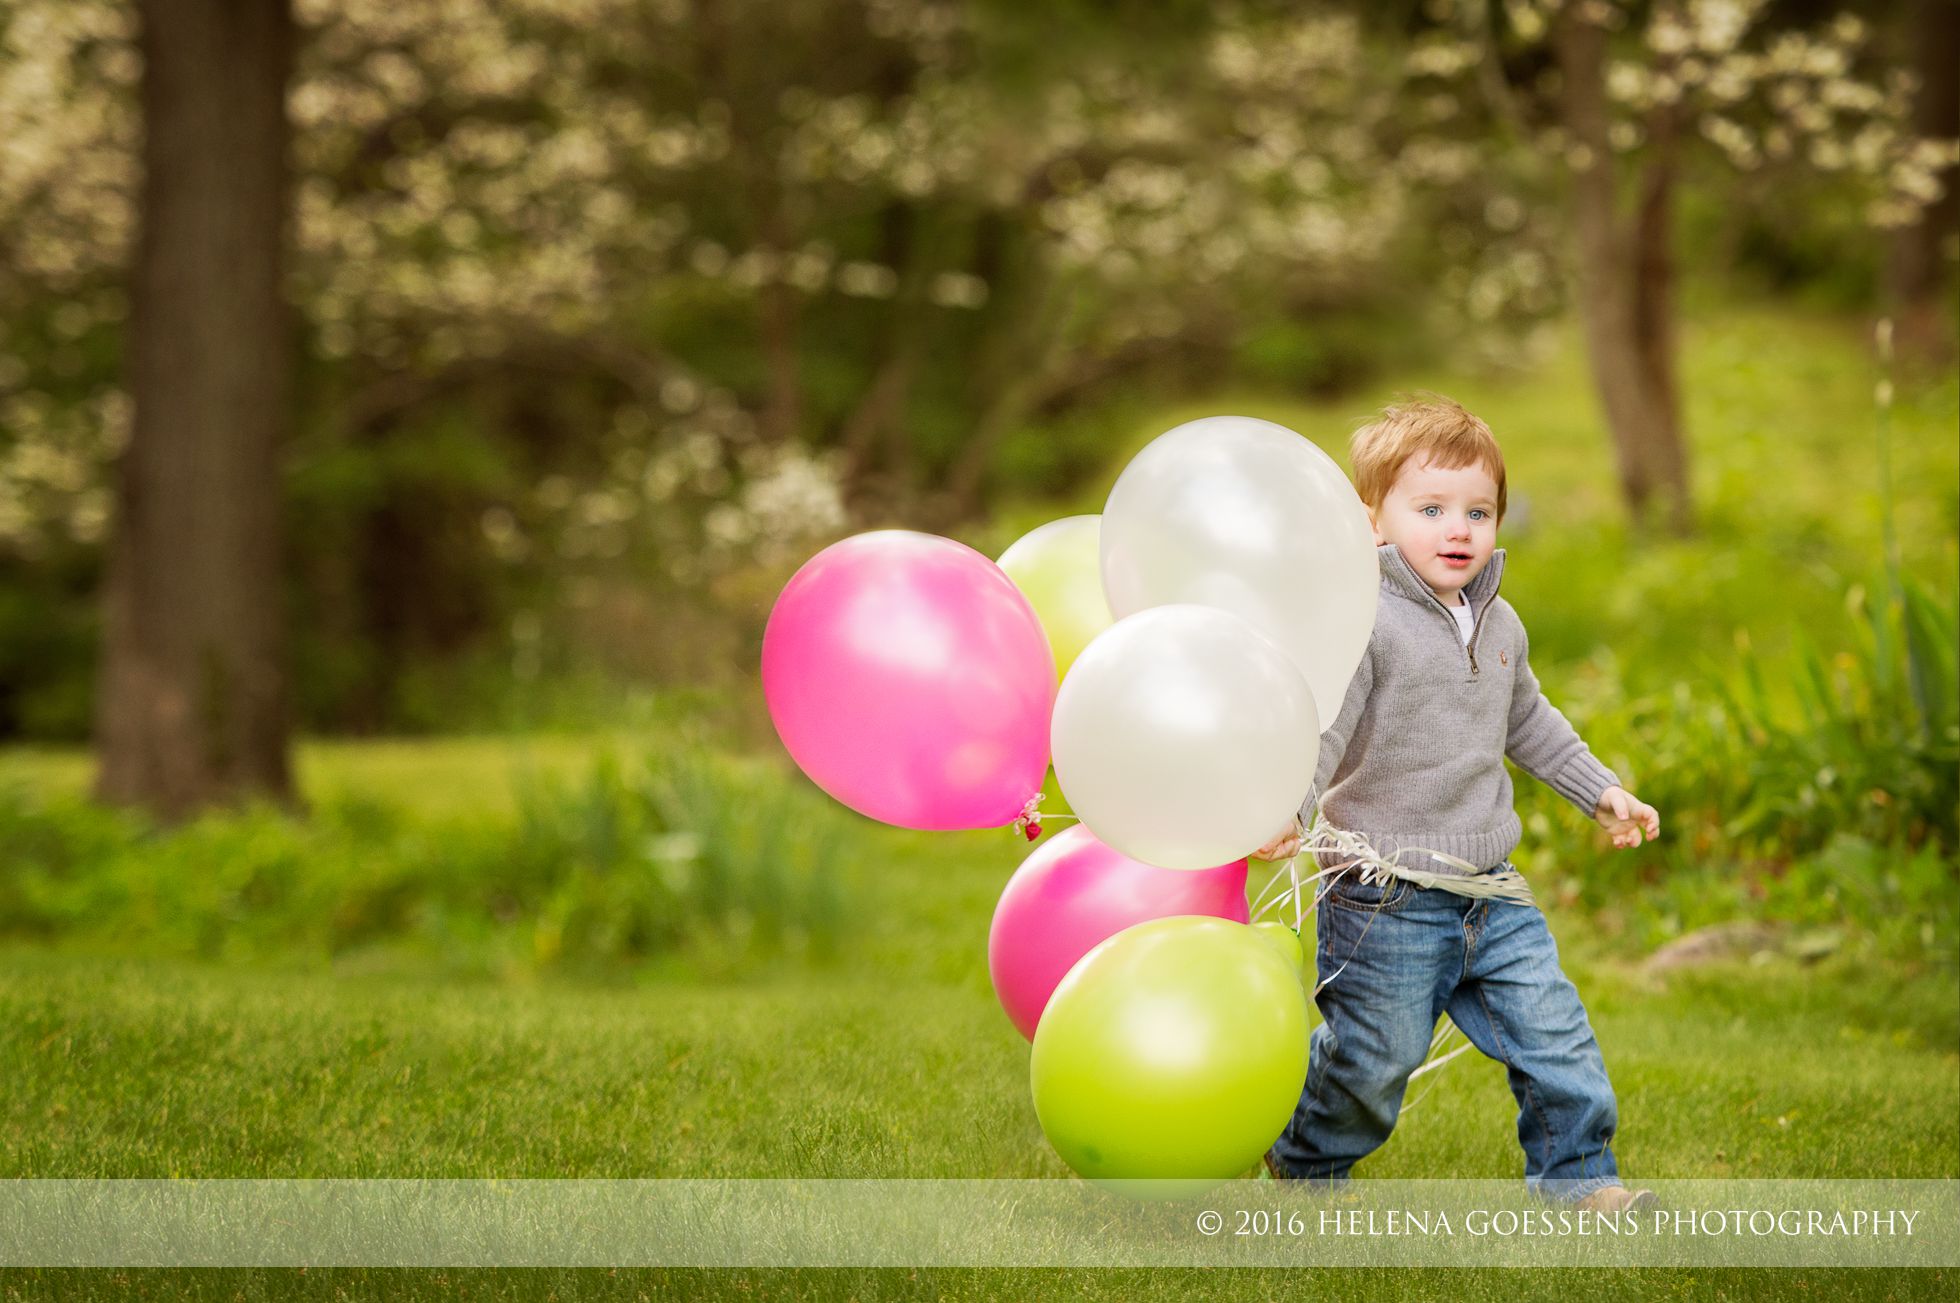 boy wearing a grey pullover running with pink and green balloons.